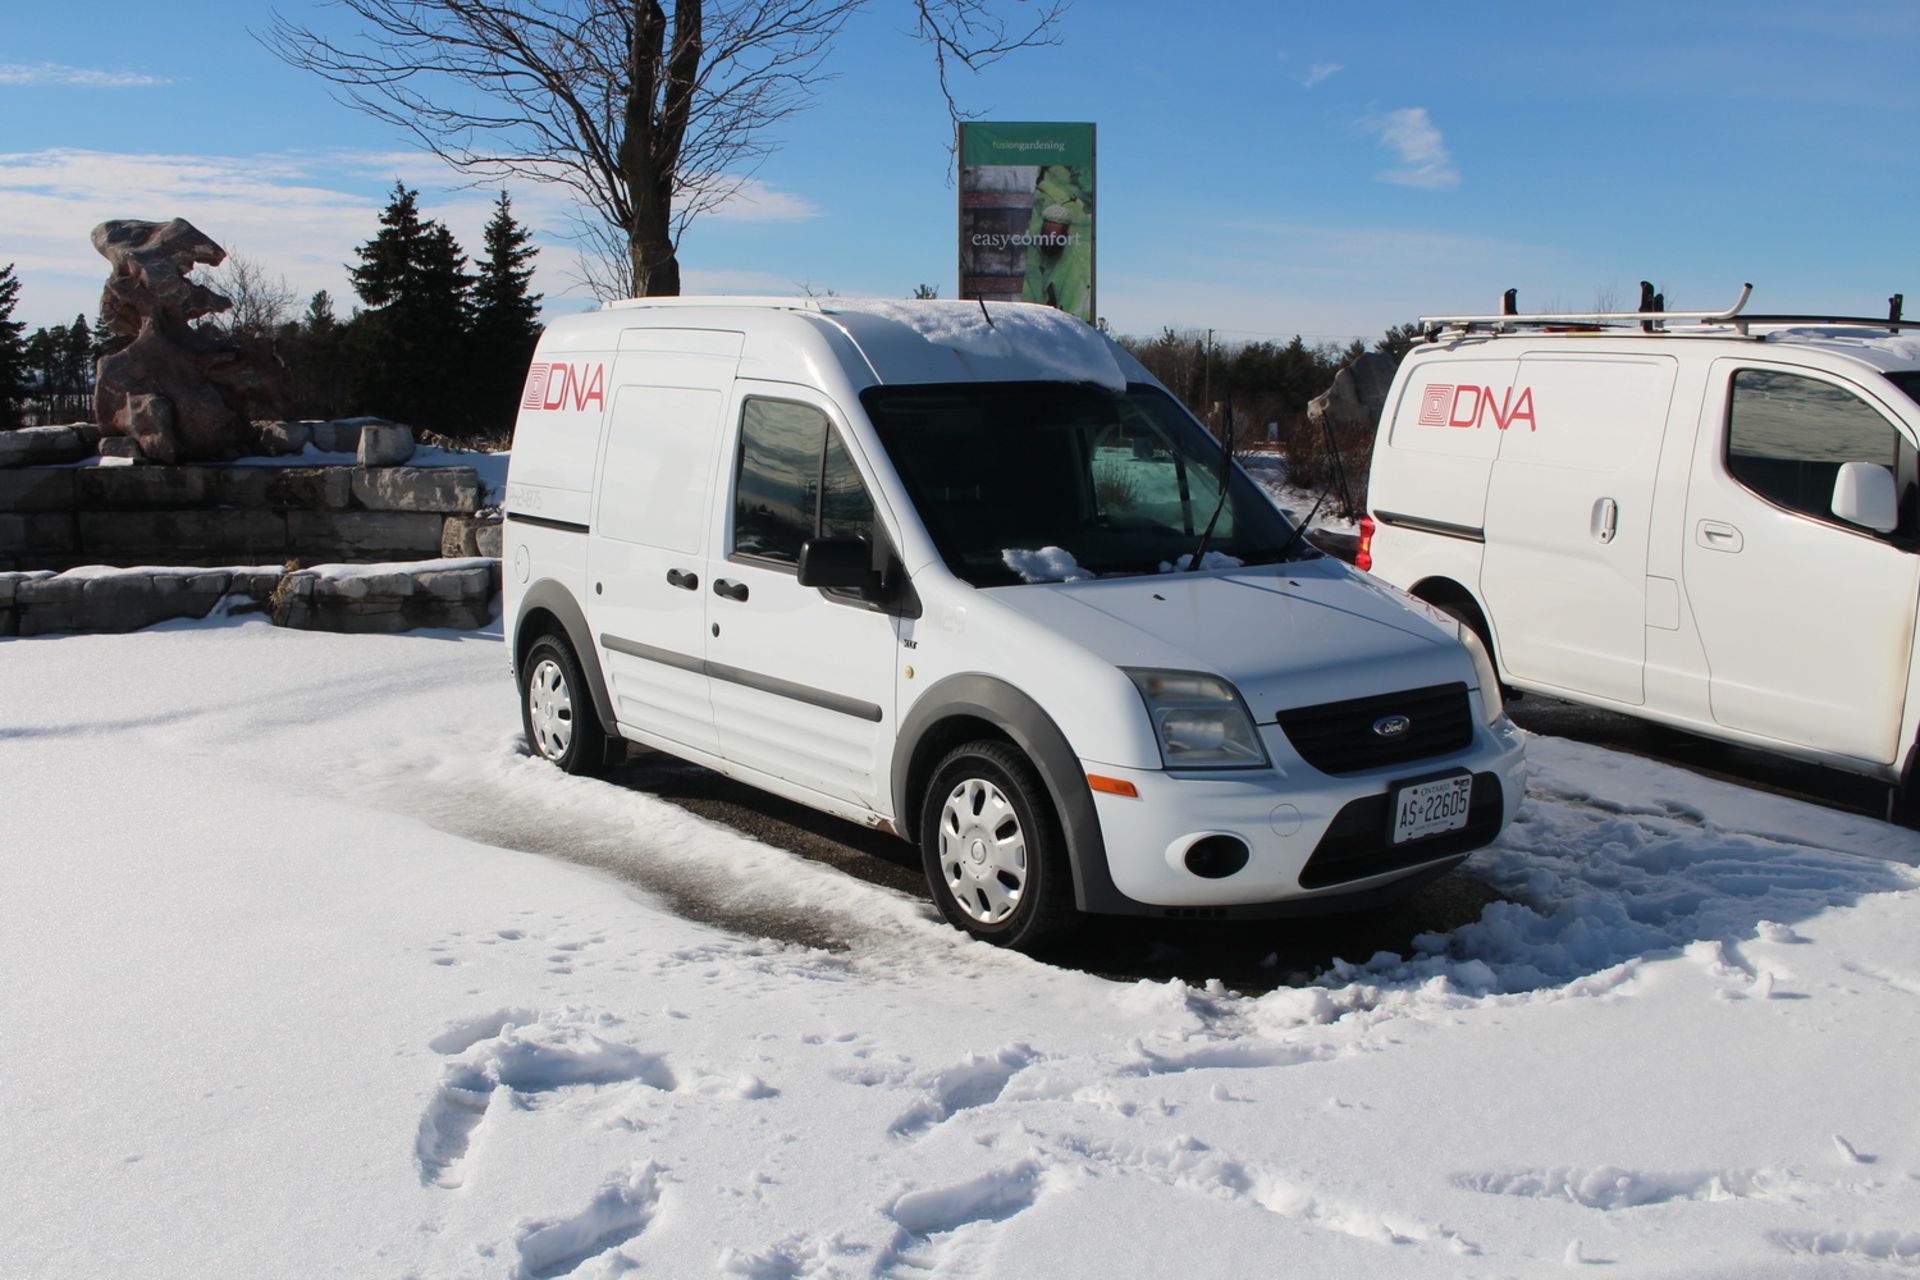 2011 FORD TRANSIT CONNECT XLT CARGO VAN W/ L4, 2.0L 4-CYL, GAS ENGINE, FWD, (211,929 KMS) - Image 2 of 6